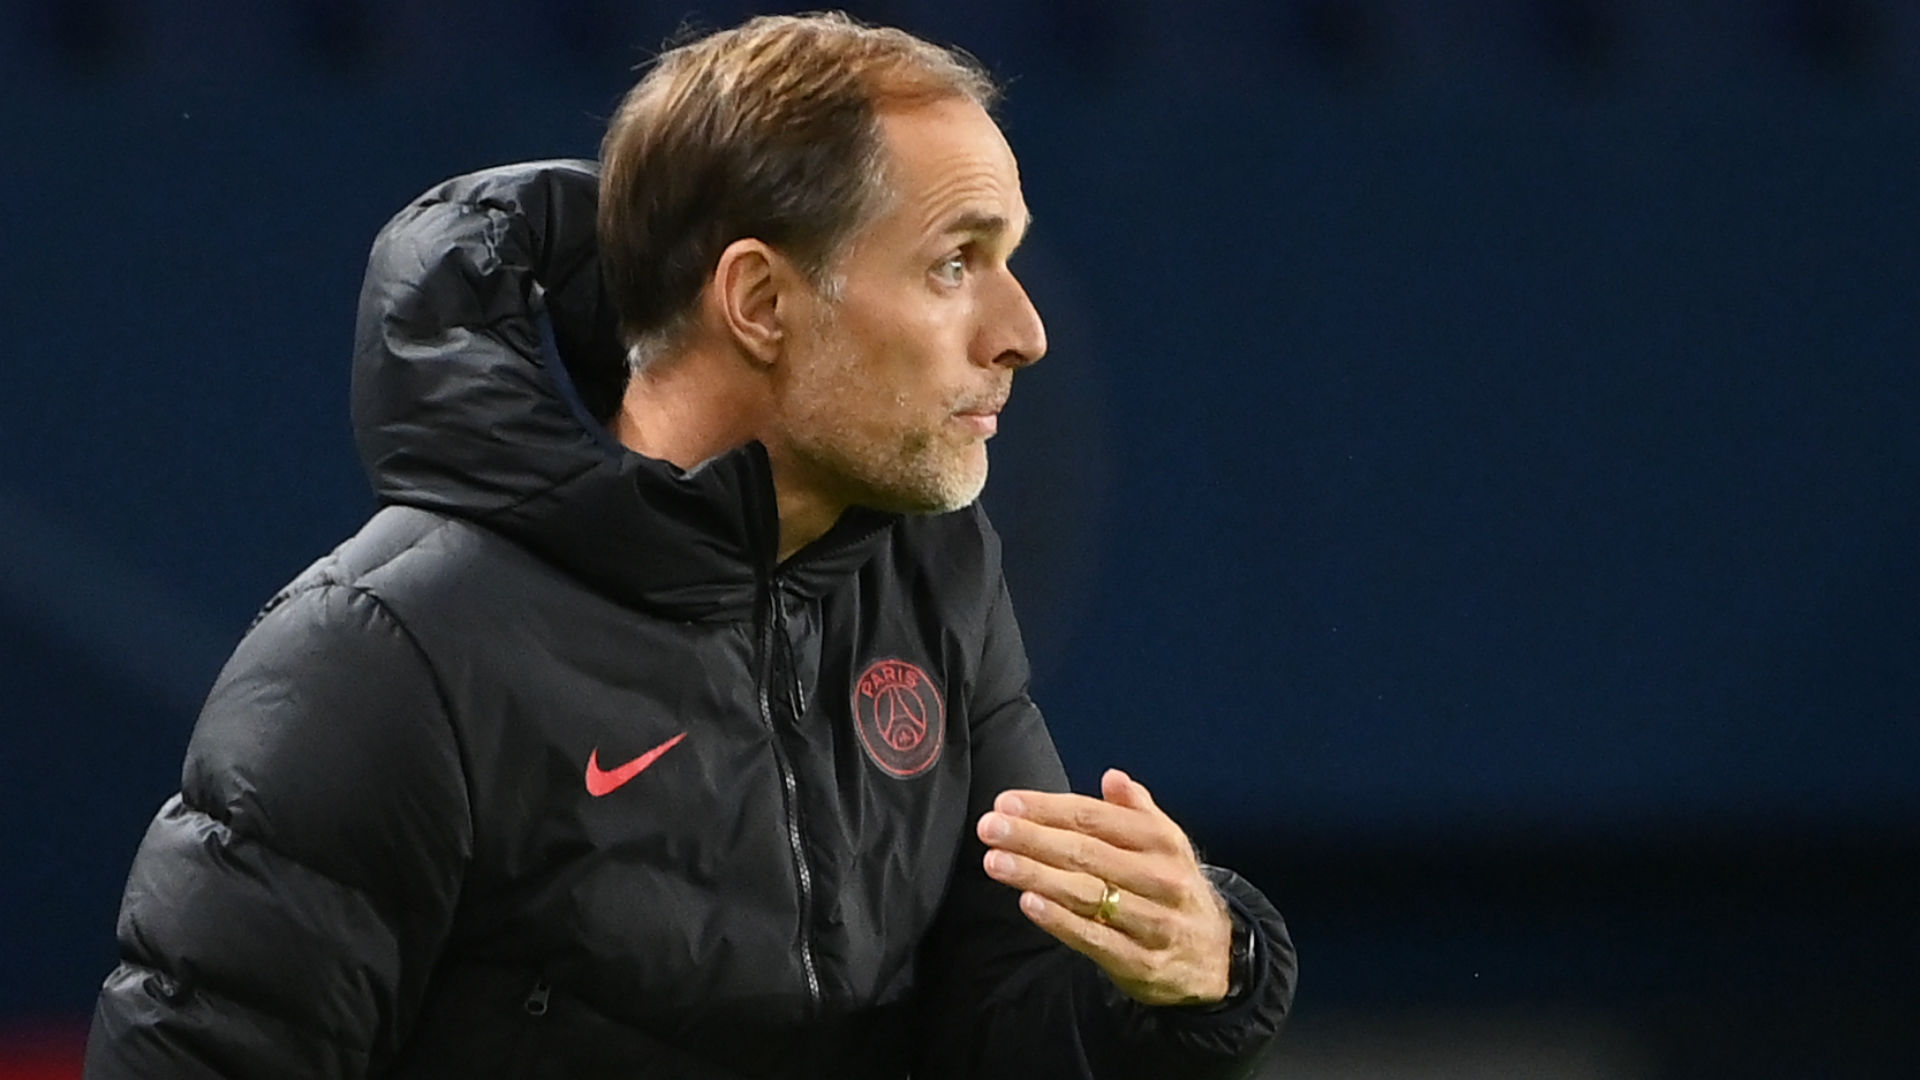 'Maybe we will only have 11 players' - Tuchel bemoans PSG injury crisis ahead of facing Man Utd in Champions League